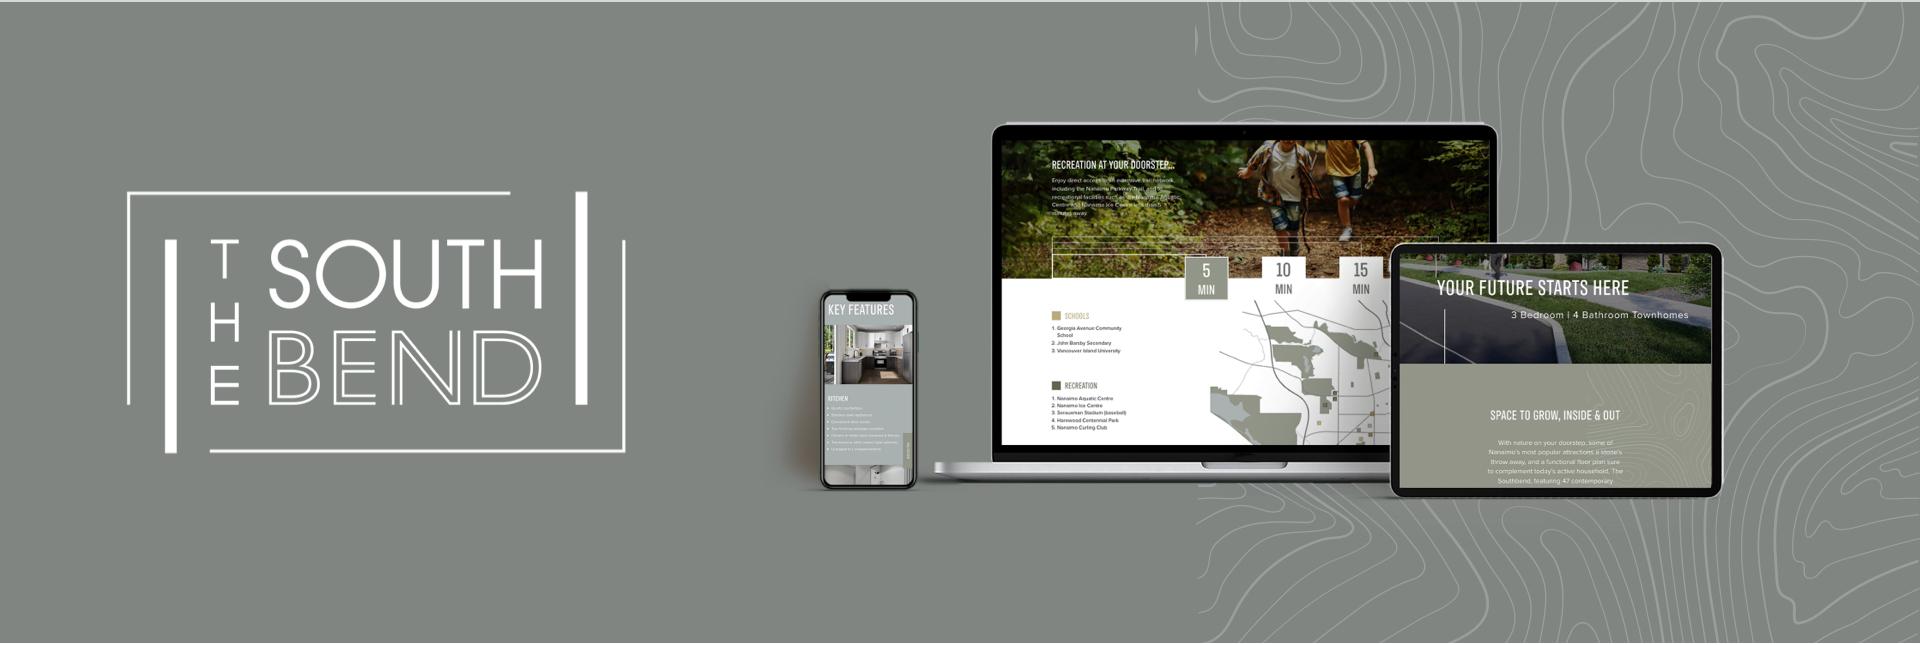 The Southbend website custom designed and built by Brixwork